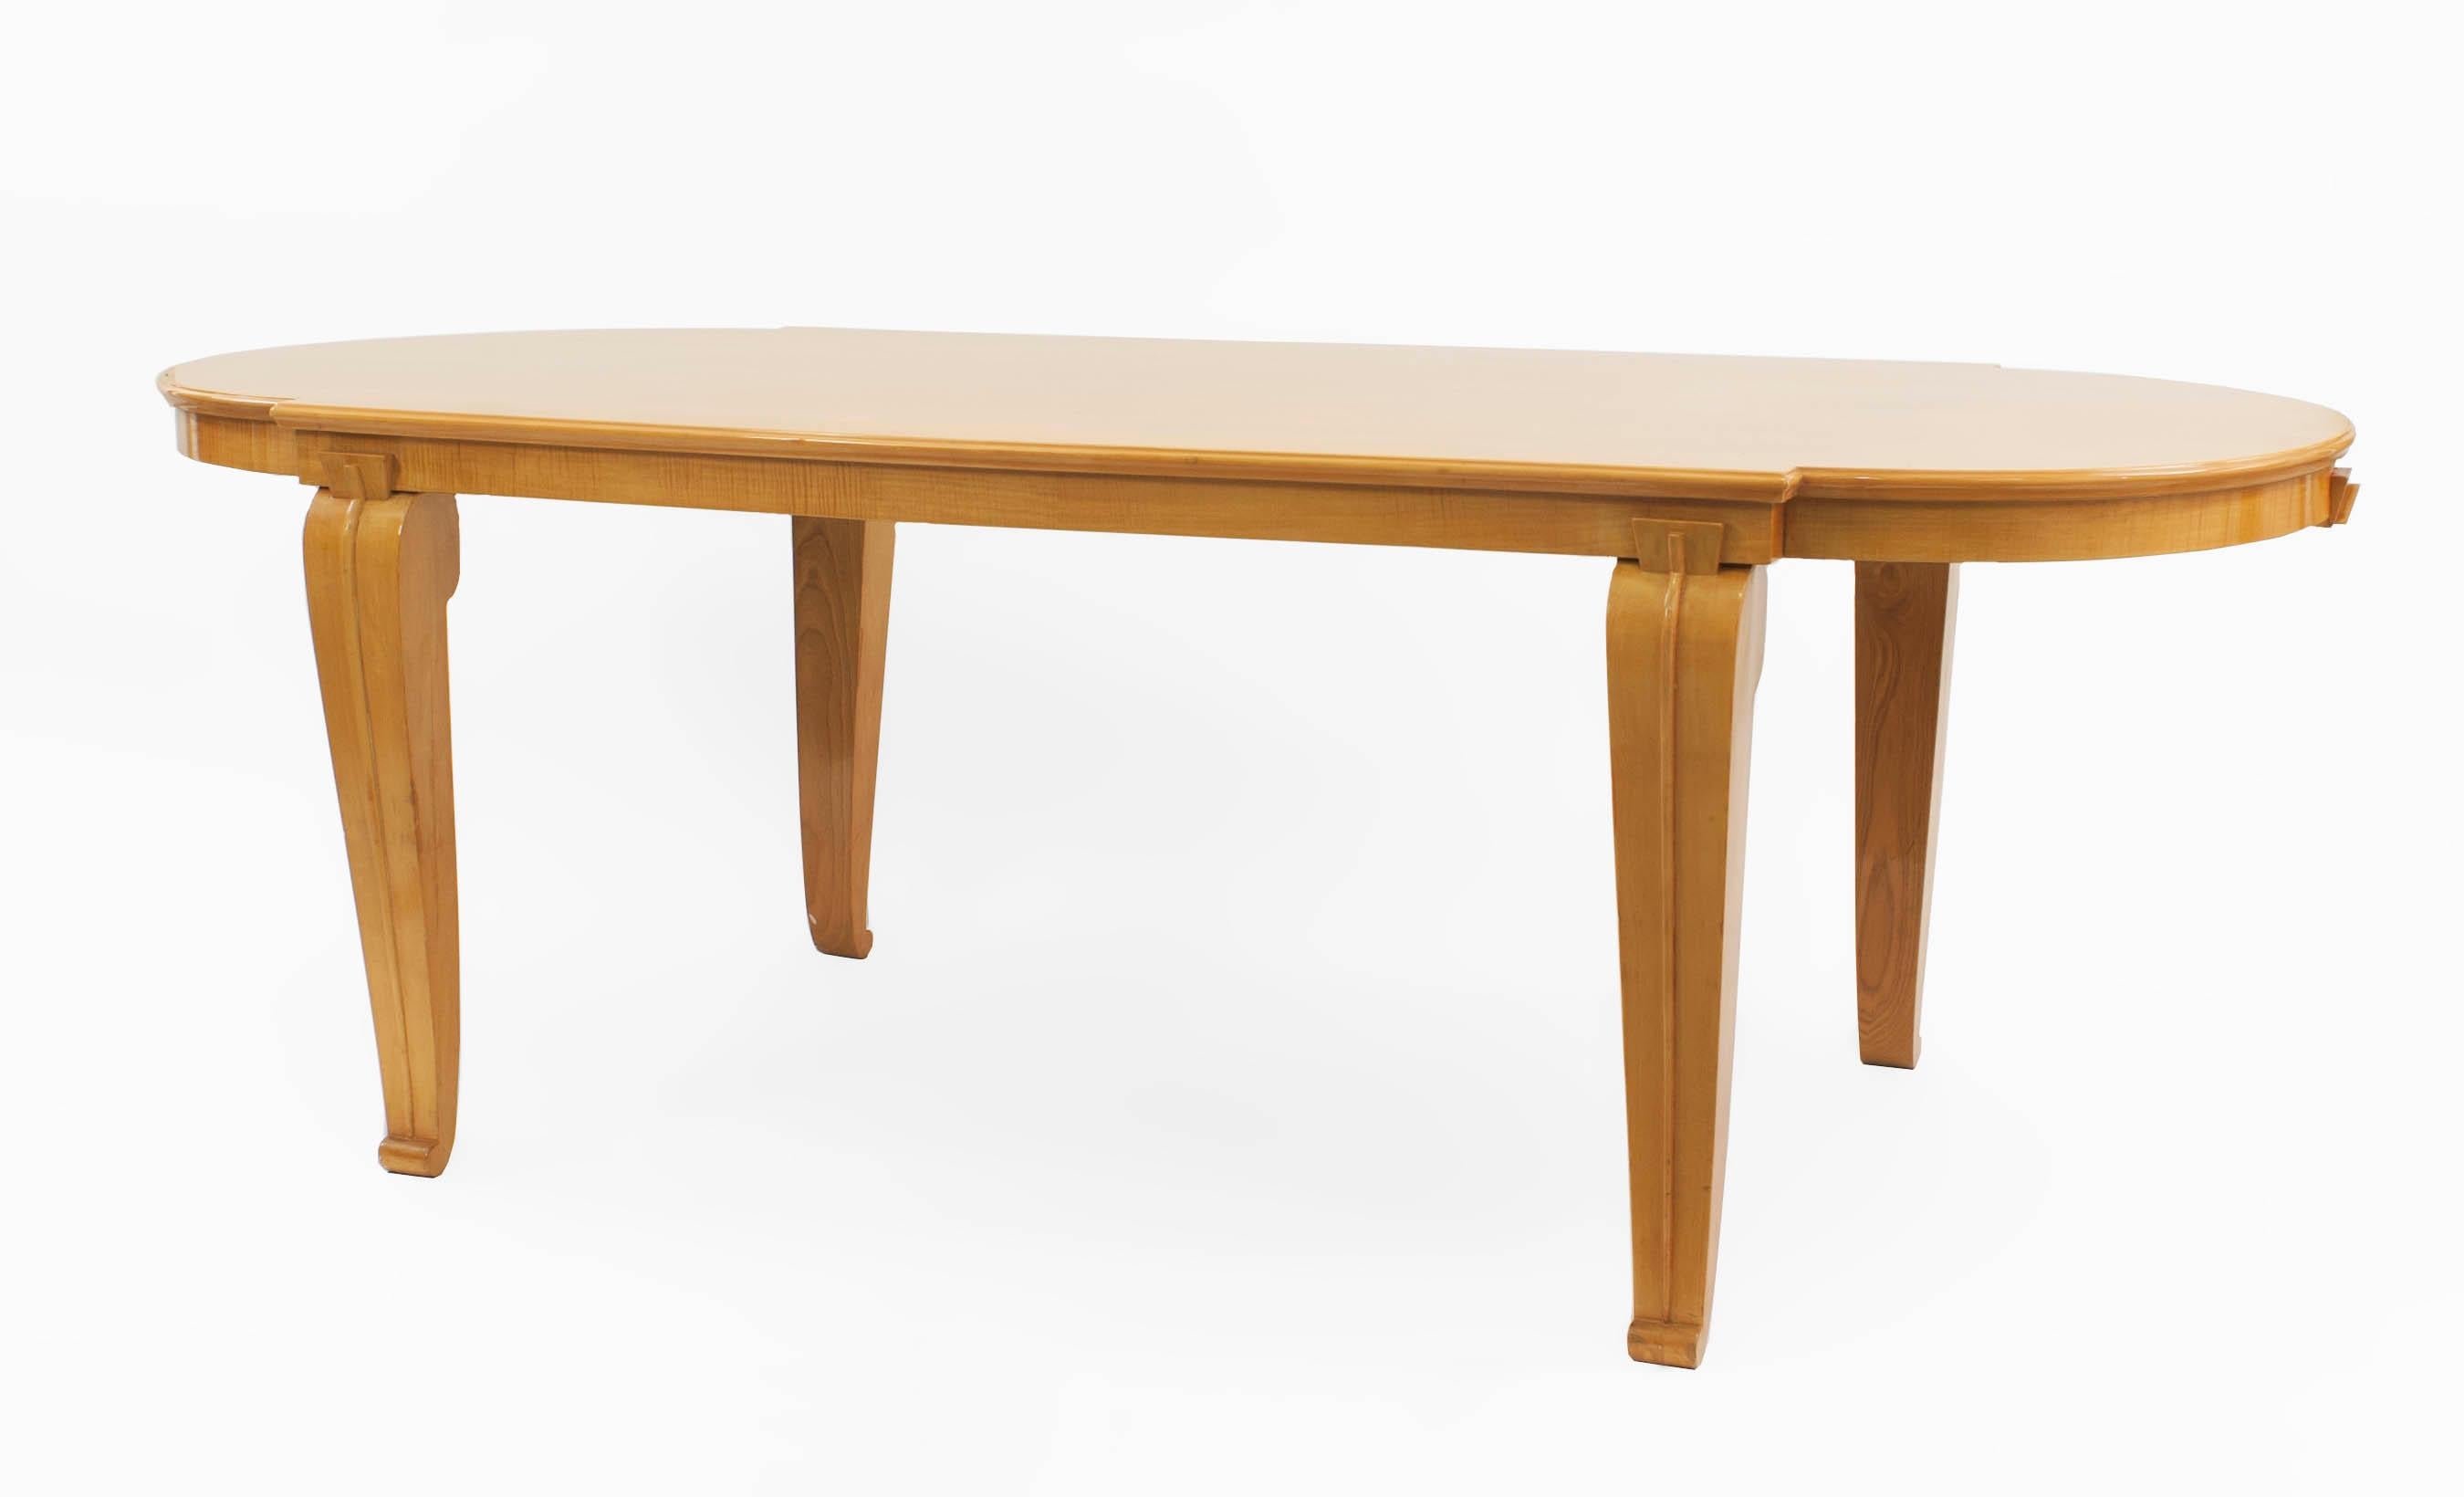 French Mid-Century (1938) sycamore dining table having rounded ends with scroll form legs (by ANDRE ARBUS) (ref: ARBUS, by Brunhammer, pg 154-5;)
